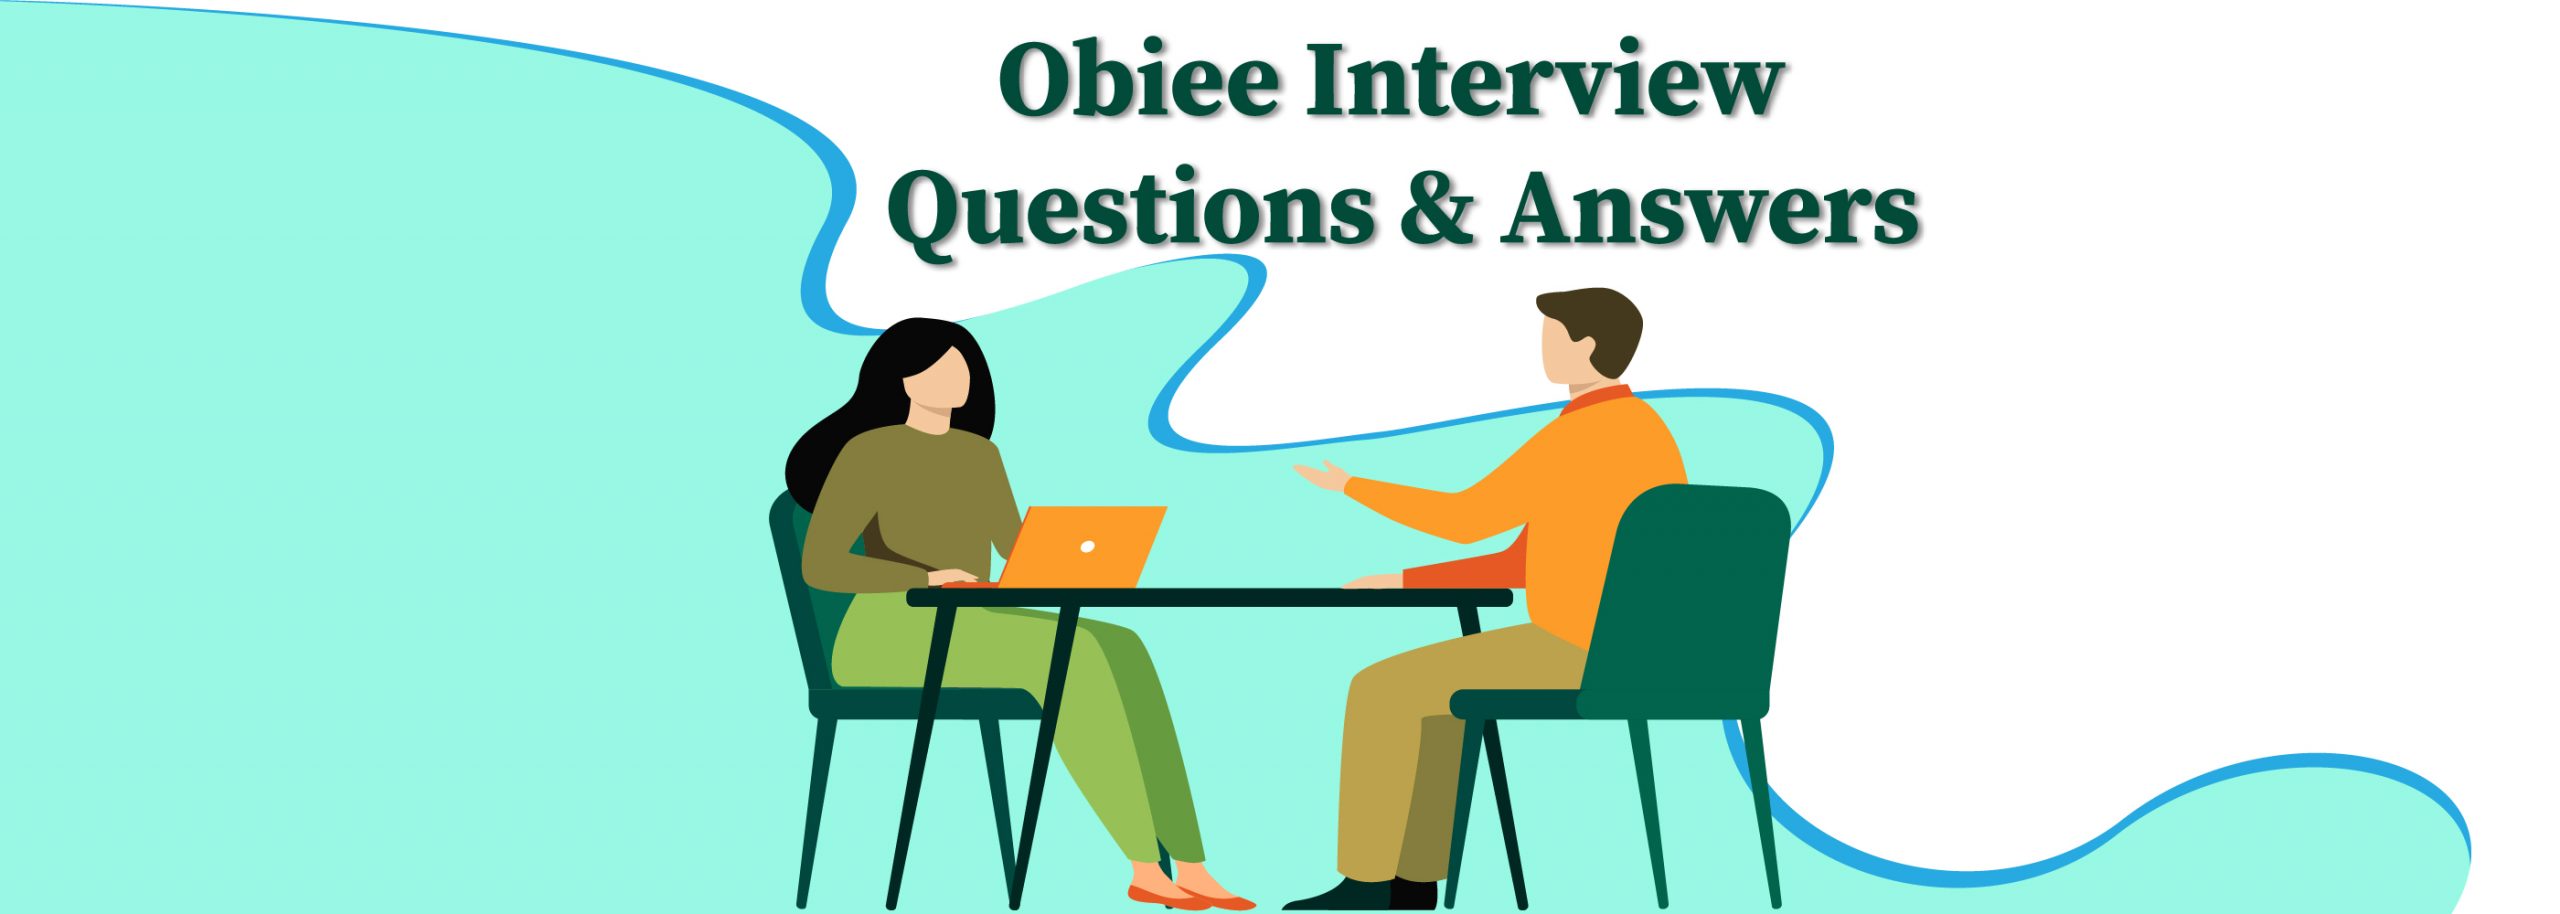 Obiee Interview Questions